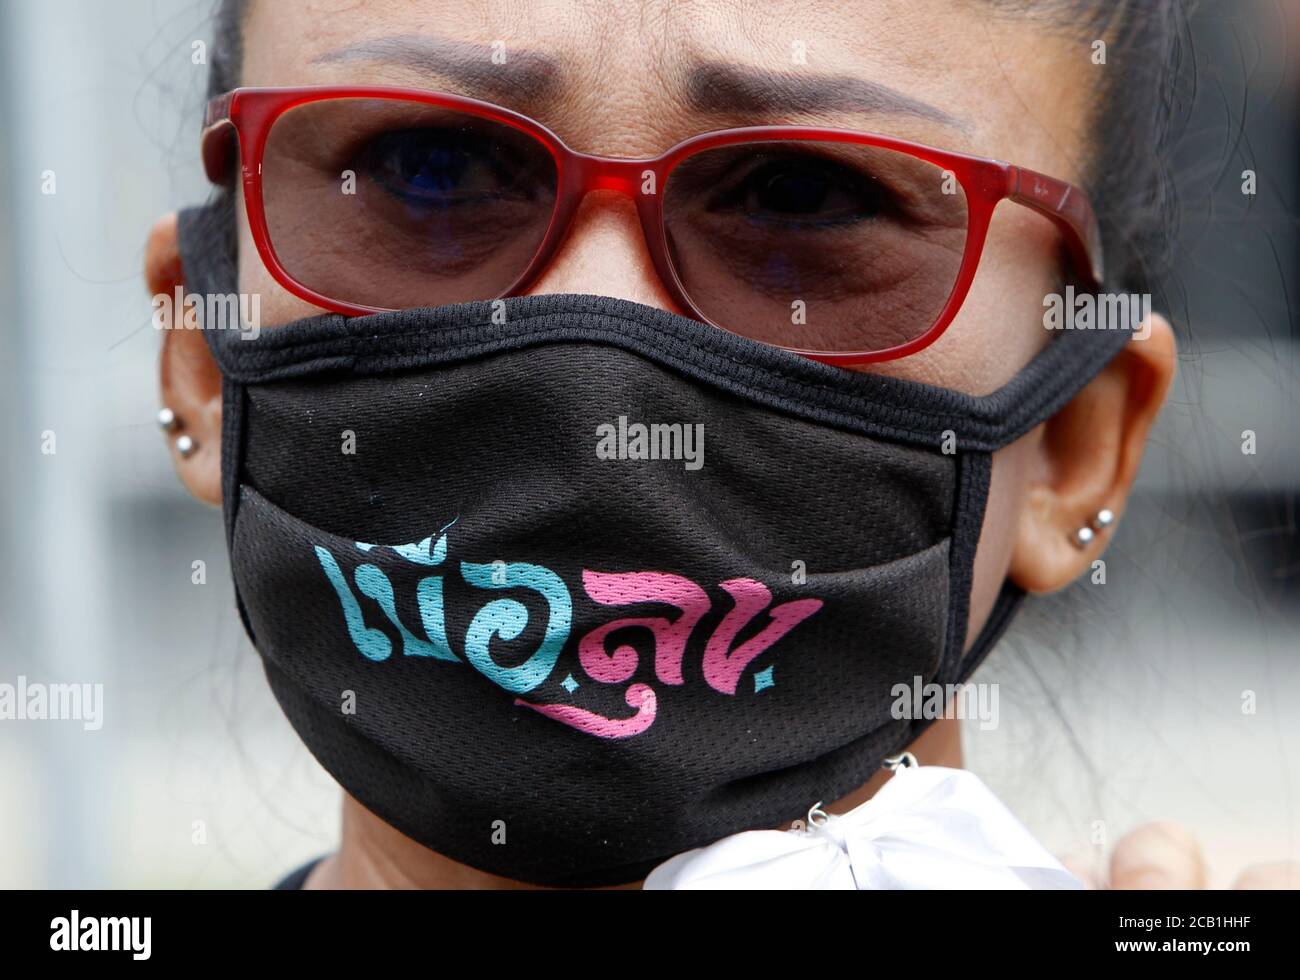 Bangkok, Thailand. 10th Aug, 2020. A protester looks on while wearing a face mask during the demonstration.protesters took to the streets demanding the resignation of the government and the dissolution of parliament. Organisers issued three demands: the dissolution of parliament, an end to harassment of government critics, and amendments to the military-written constitution that critics say virtually guaranteed victory for Prayuth's party in elections last year. Credit: SOPA Images Limited/Alamy Live News Stock Photo